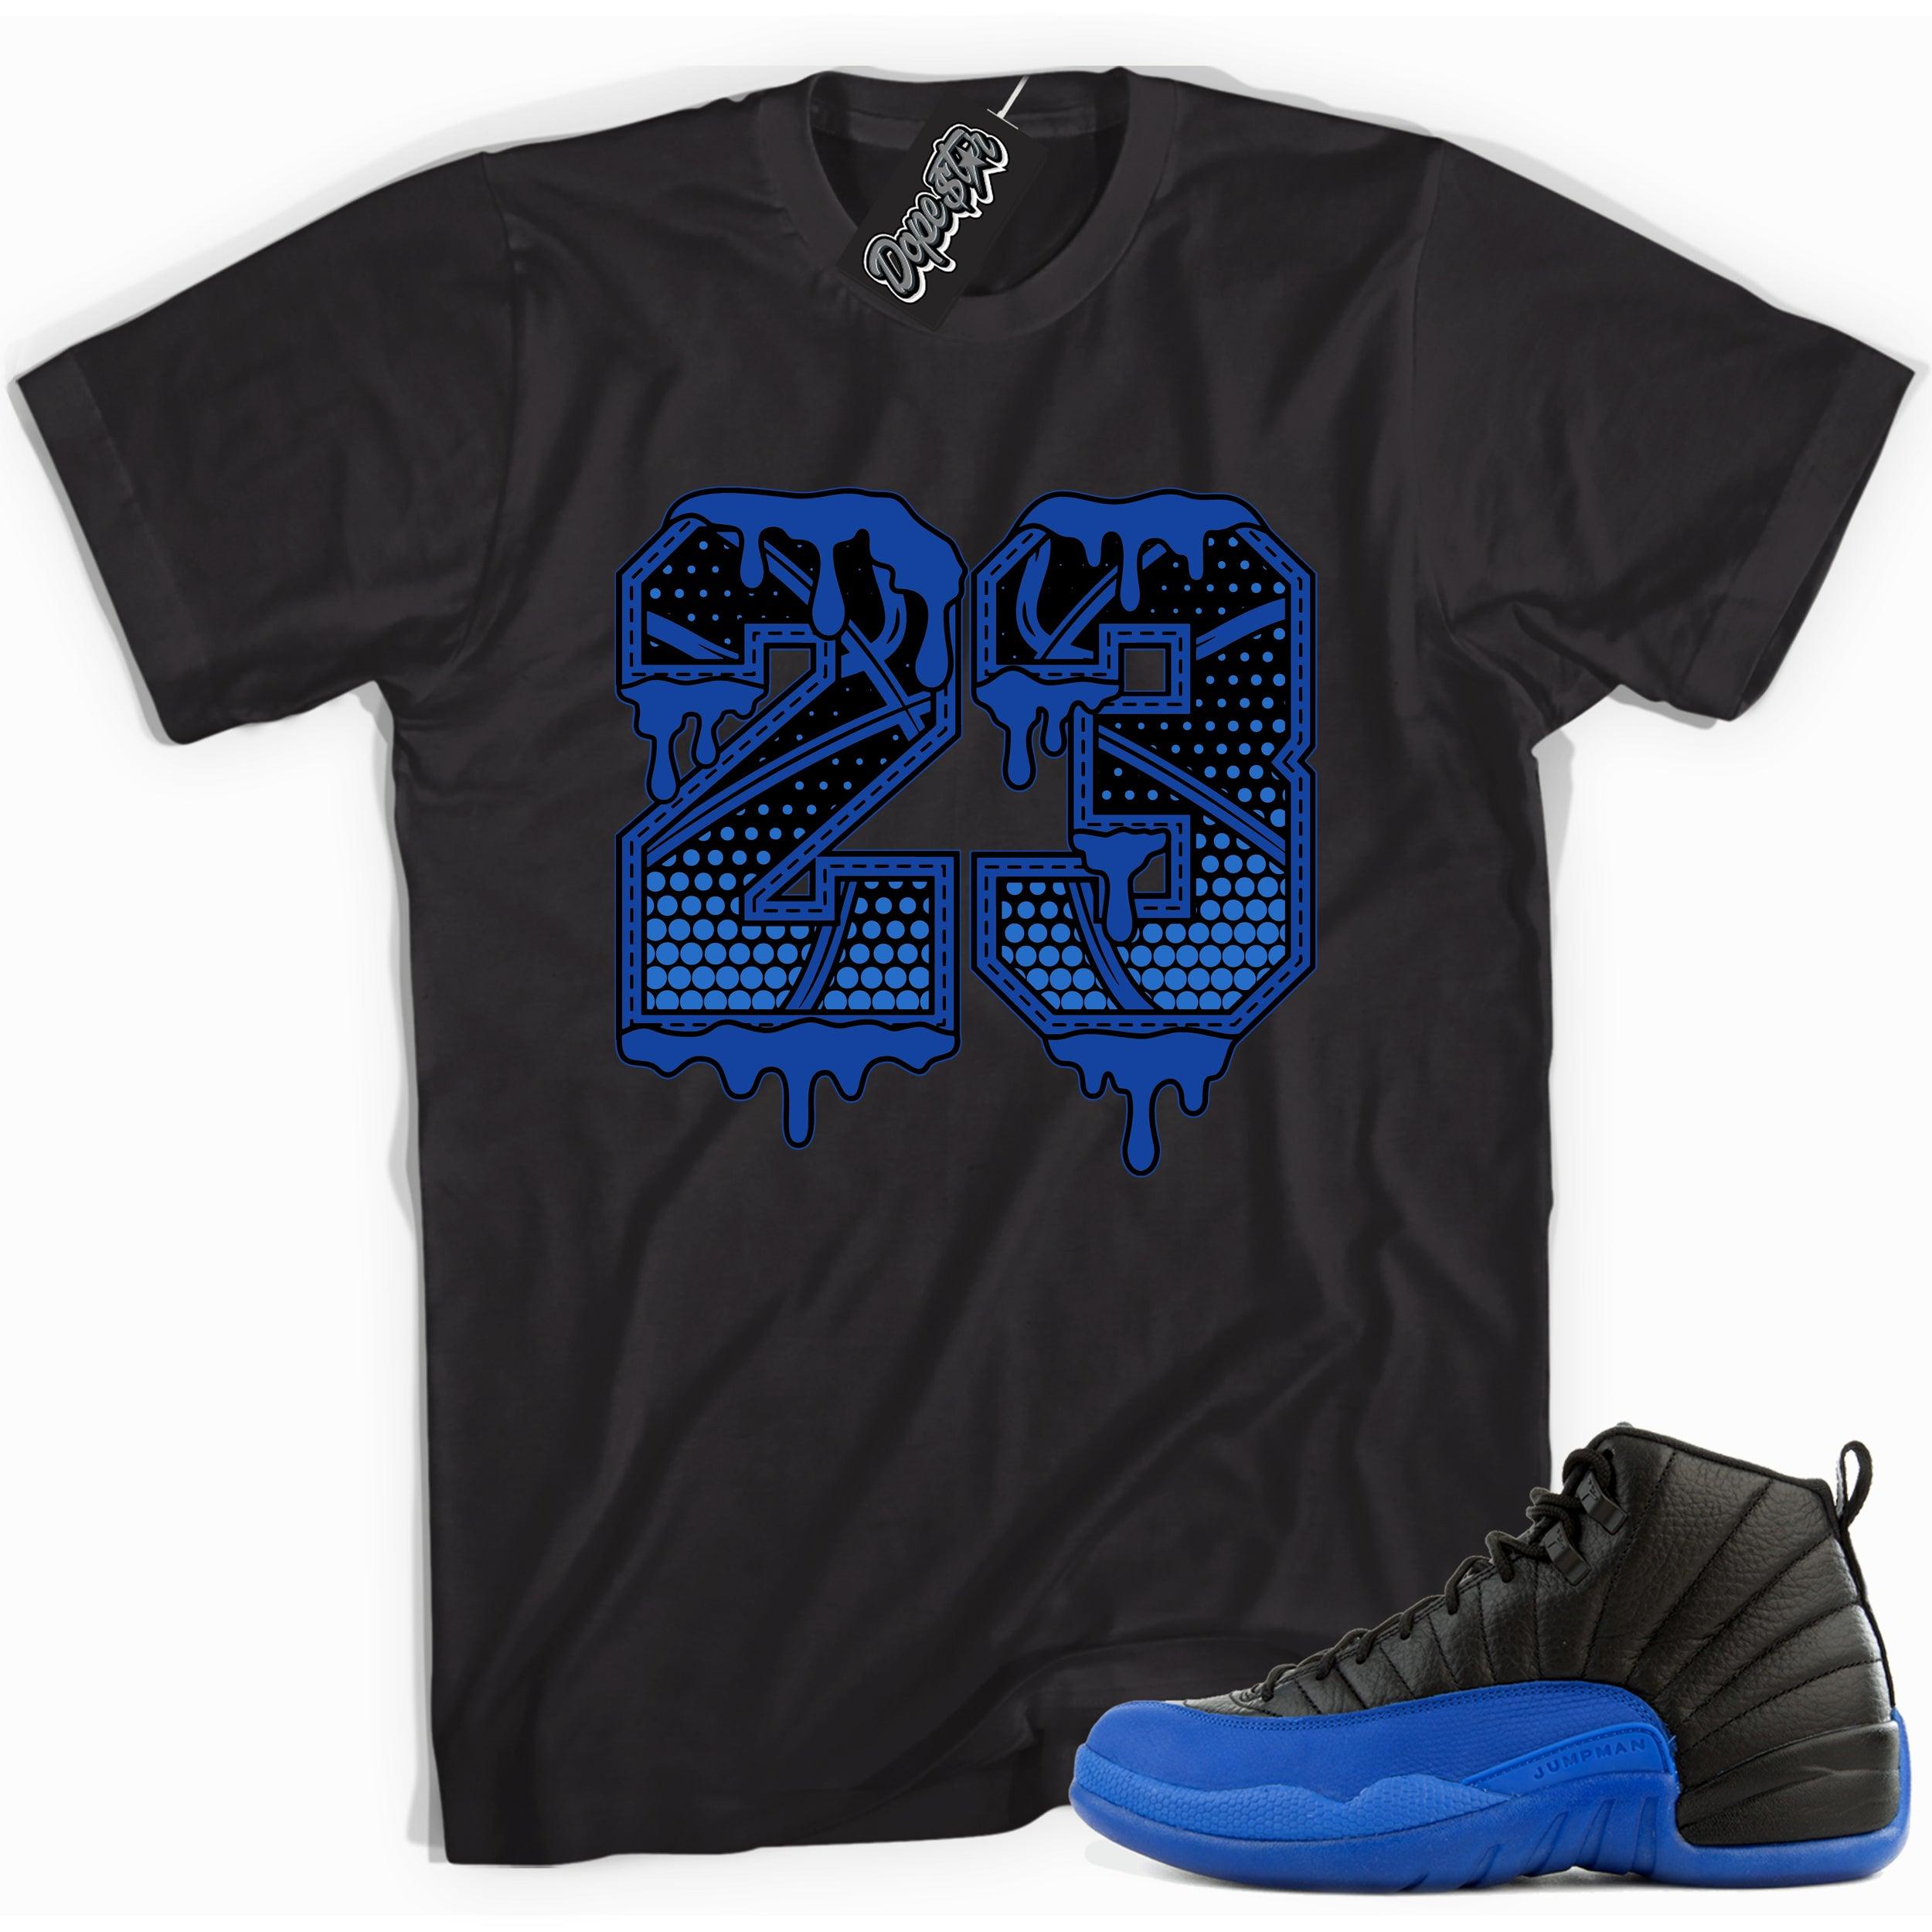 Cool black graphic tee with '23 basketball' print, that perfectly matches  Air Jordan 12 Retro Black Game Royal sneakers.